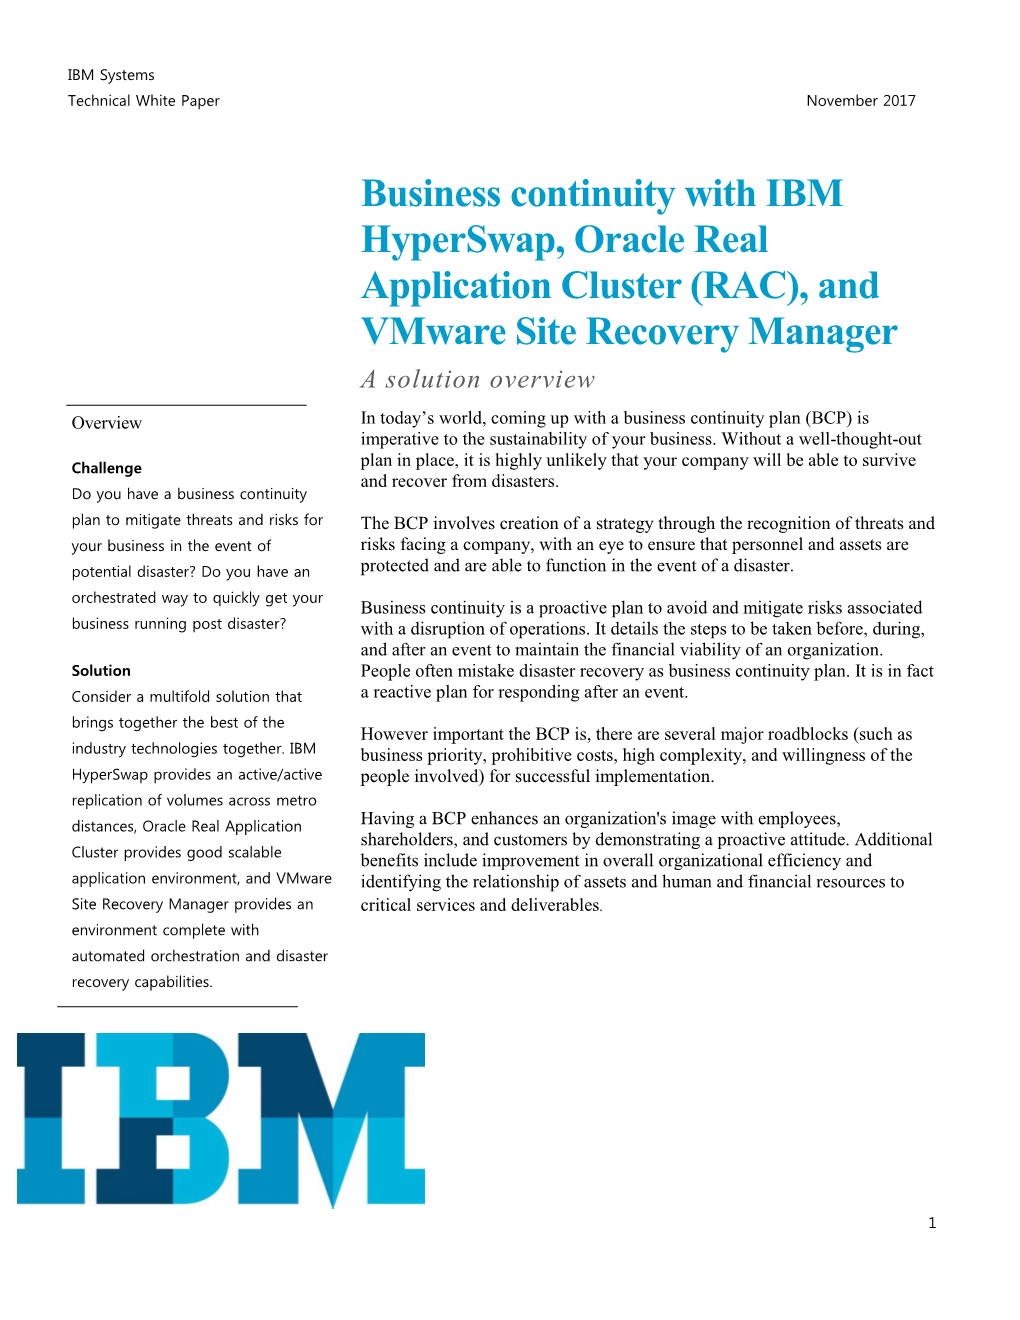 Business Continuity with IBM Hyperswap, Oracle Real Application Cluster (RAC), and Vmware Site Recovery Manager a Solution Overview